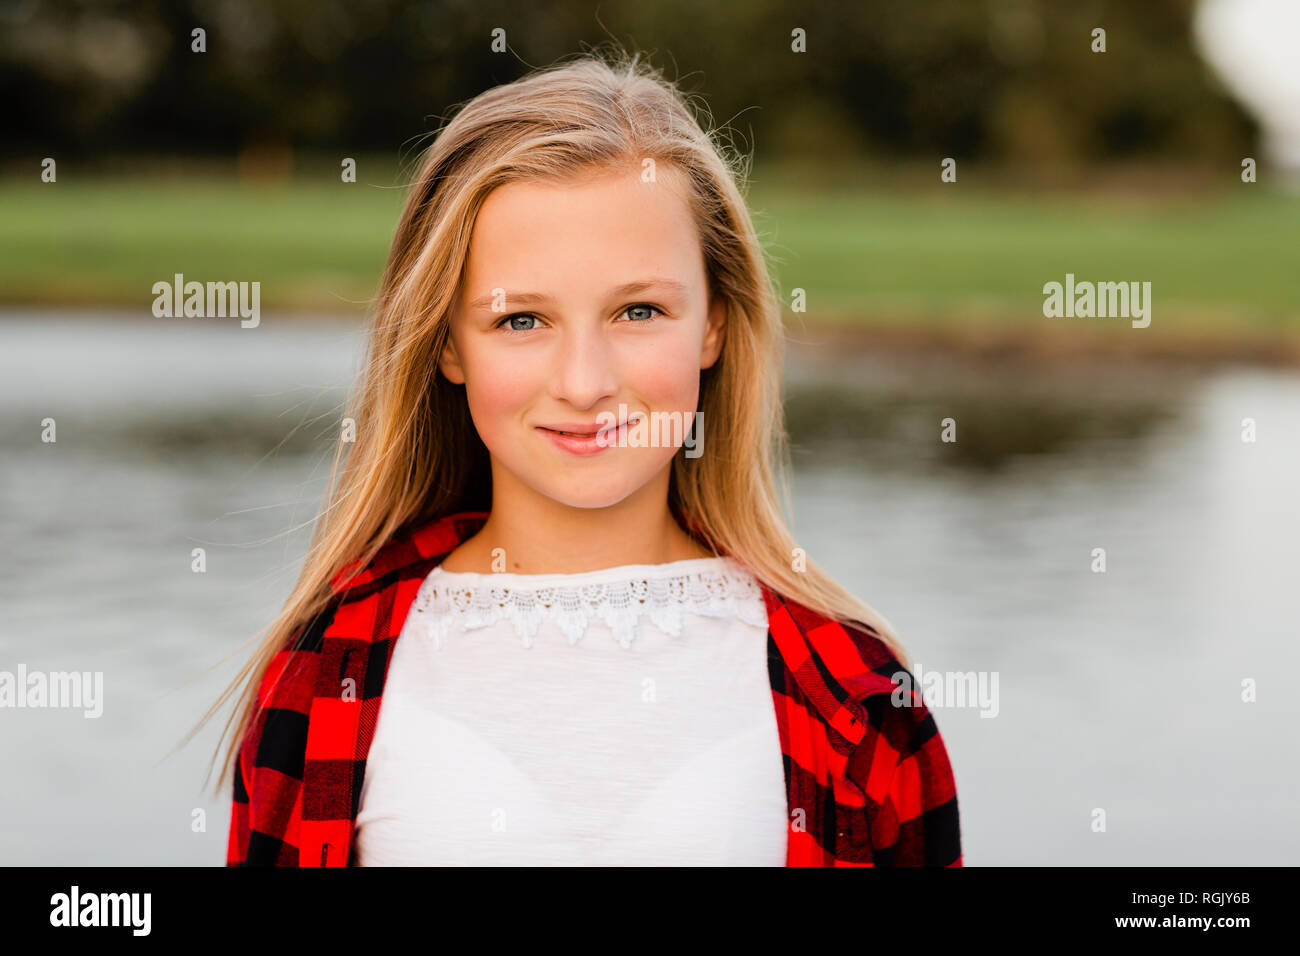 Portrait of smiling blond girl in nature Stock Photo